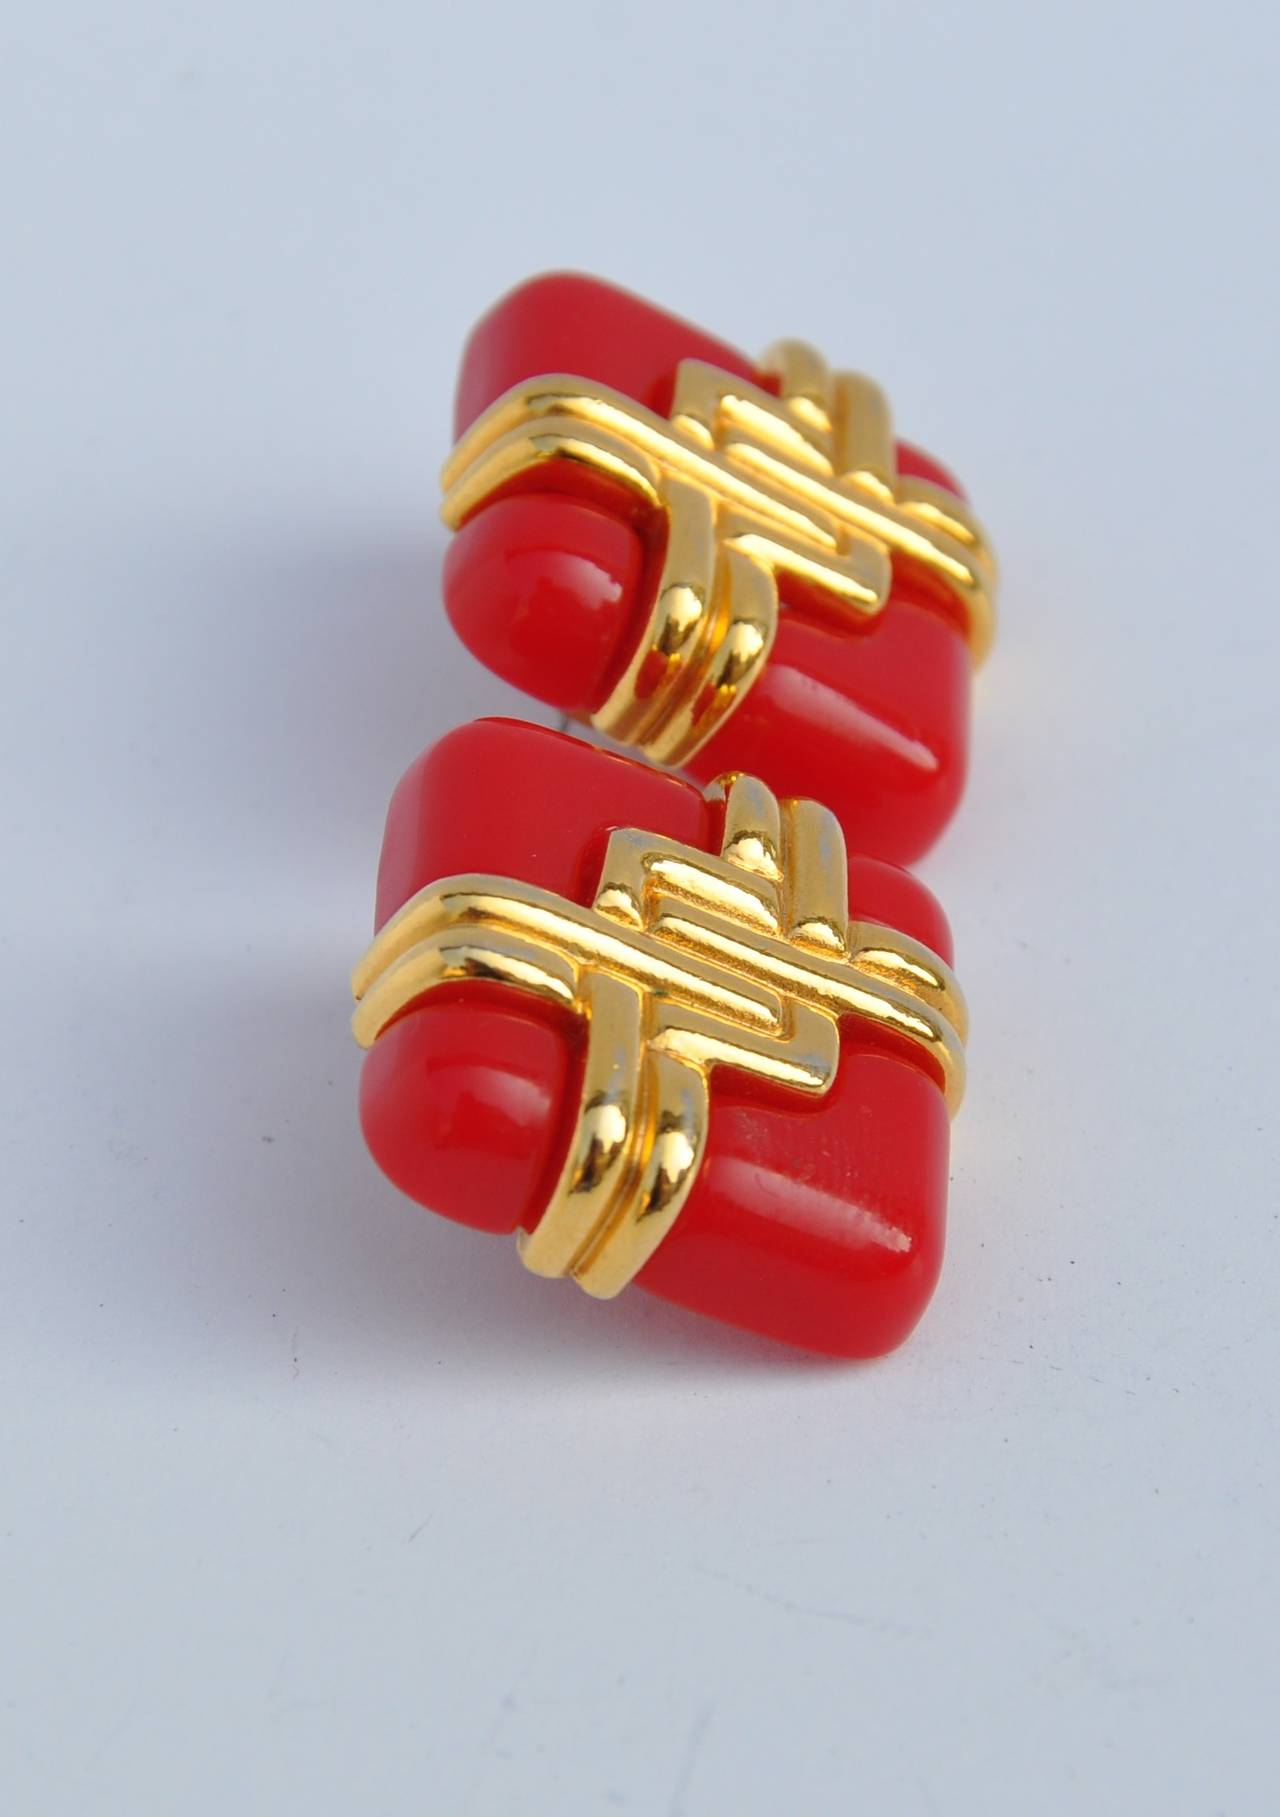 These interchangeable "Set of Three" earrings of gilded gold with a choice of red, black or blue lucite measures 1 1/16" x 1 1/16" when placed together. The lucite separates measures 1" x 1" each.